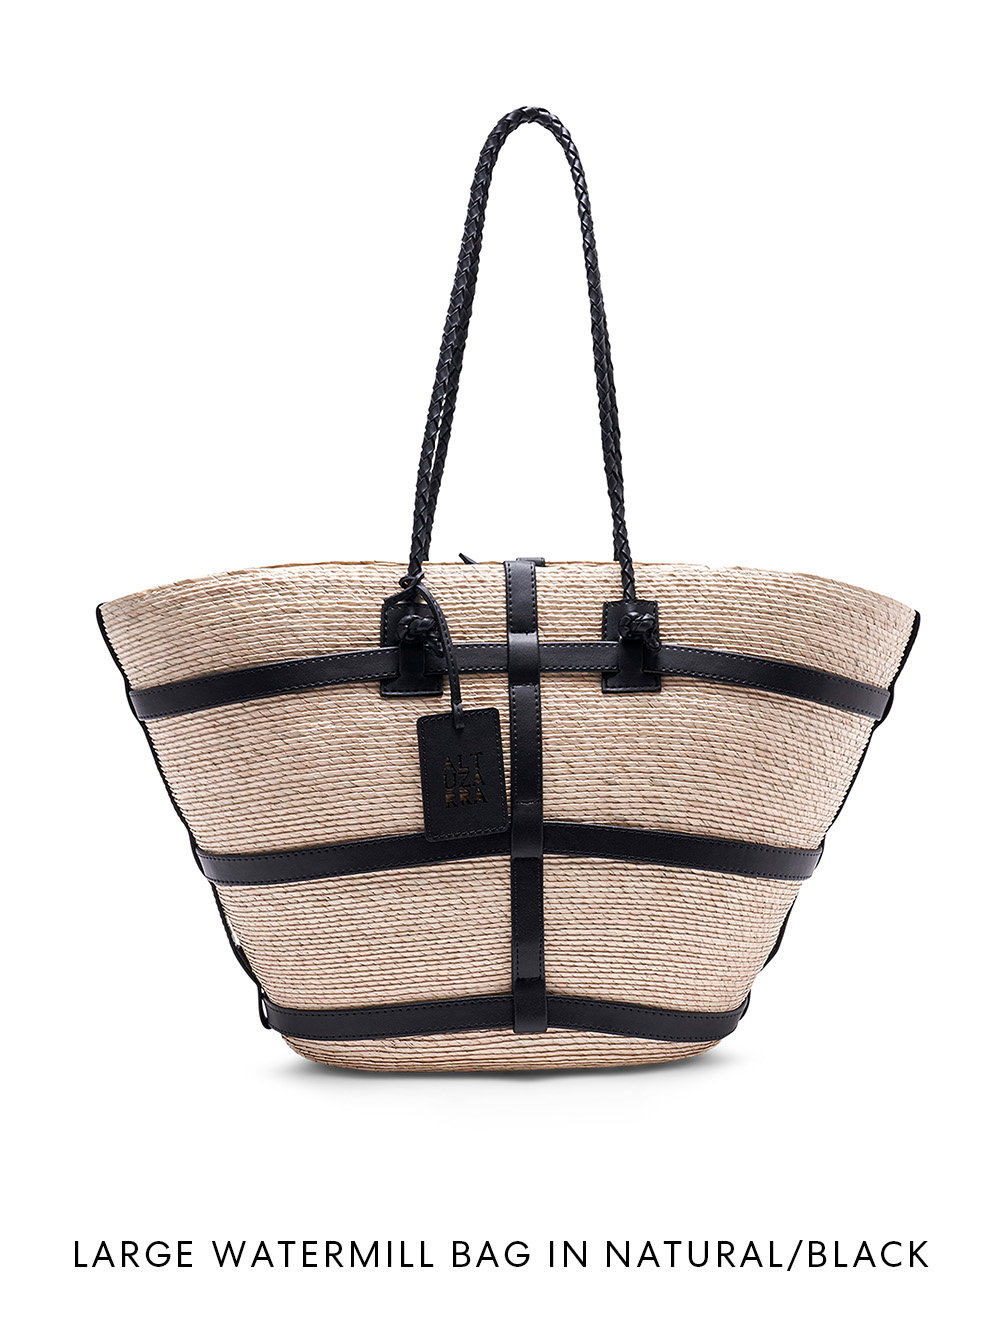 The 'Watermill collection of expertly crafted, natural raffia bags